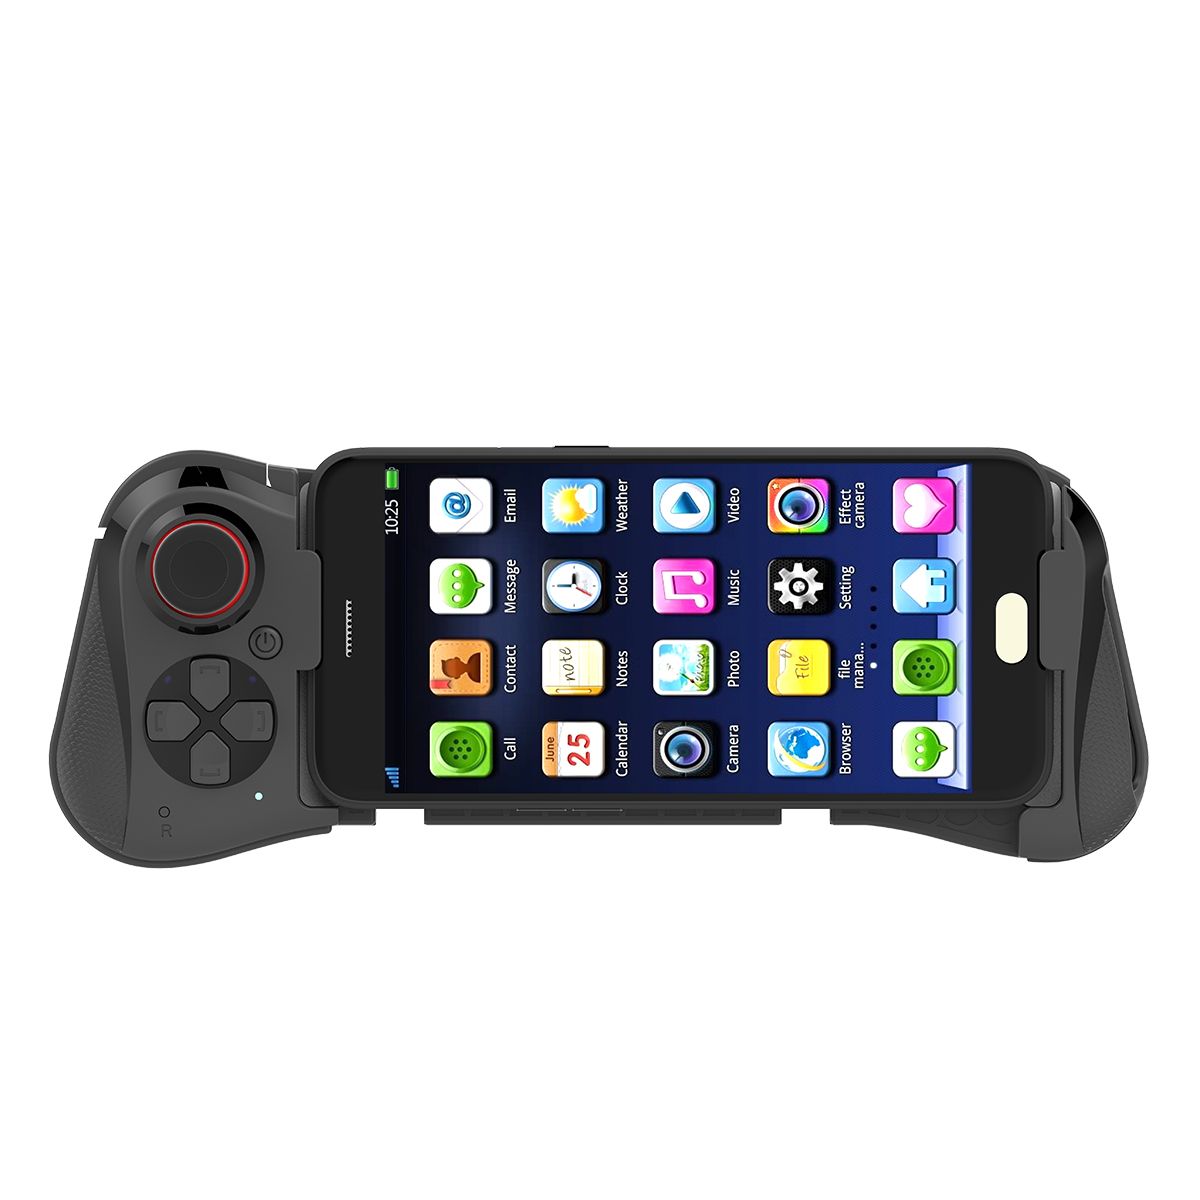 058 Wirele!   ss Game Pad Bluetooth Android Joystick Gaming Gamepad Vr - 058 wireless game pad bluetooth android joystick gaming gamepad vr telescopic controller for iphone pubg mobile joypad joystick controller buy controller